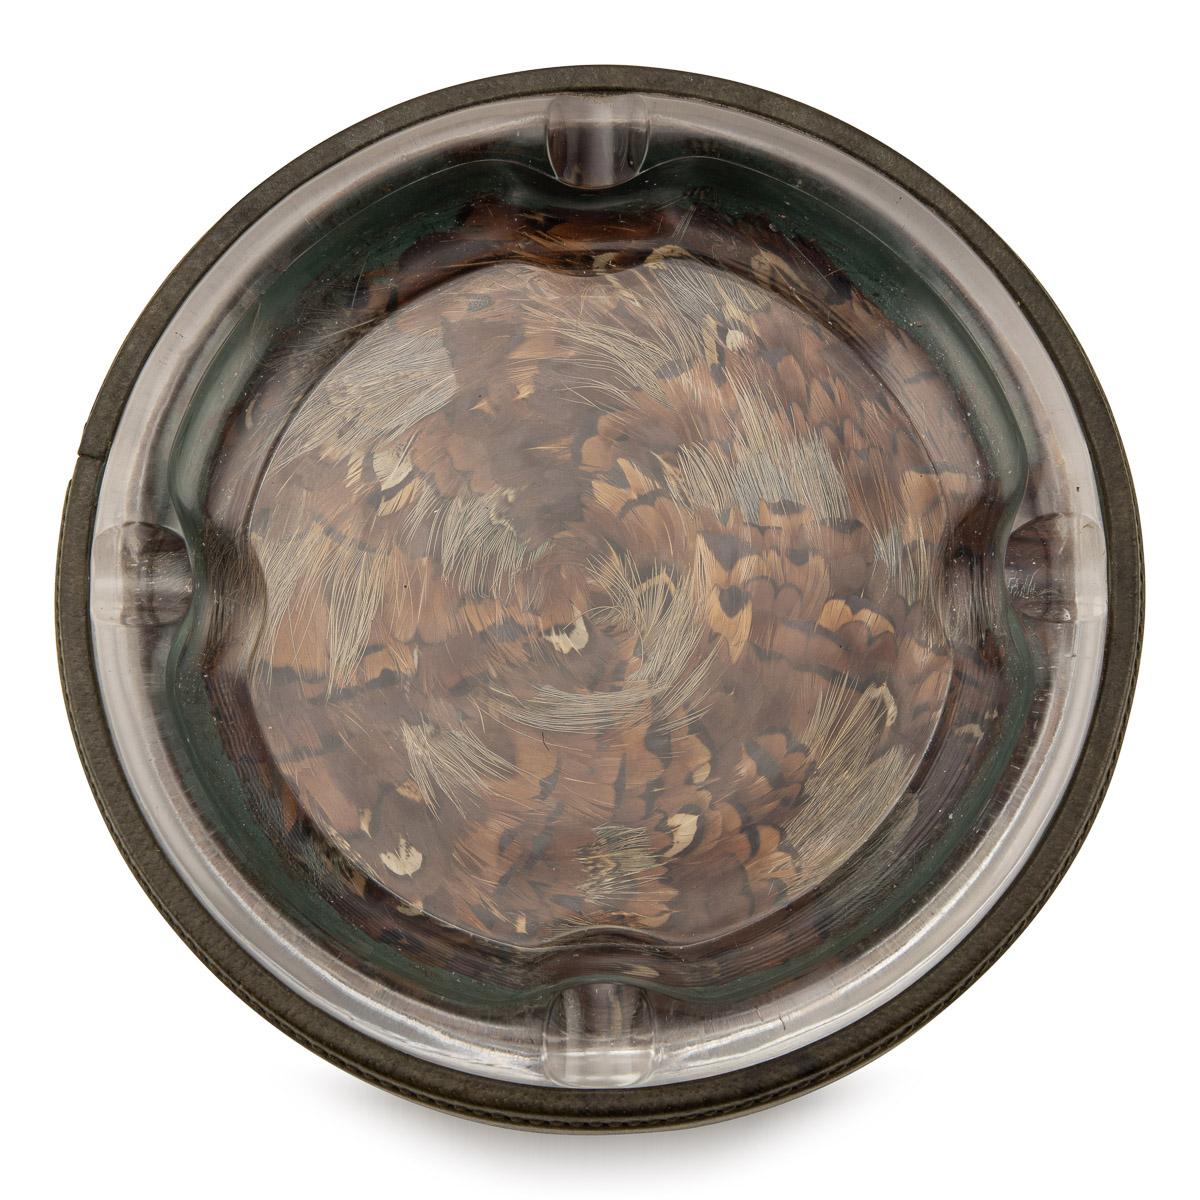 Stunning mid-20th century Gucci very large glass ashtray. The plain rim with four cigar rests, with feathers under glass. Has the original Gucci retail mark, made in Italy. it is easy to imagine the appeal behind these objects which would have made